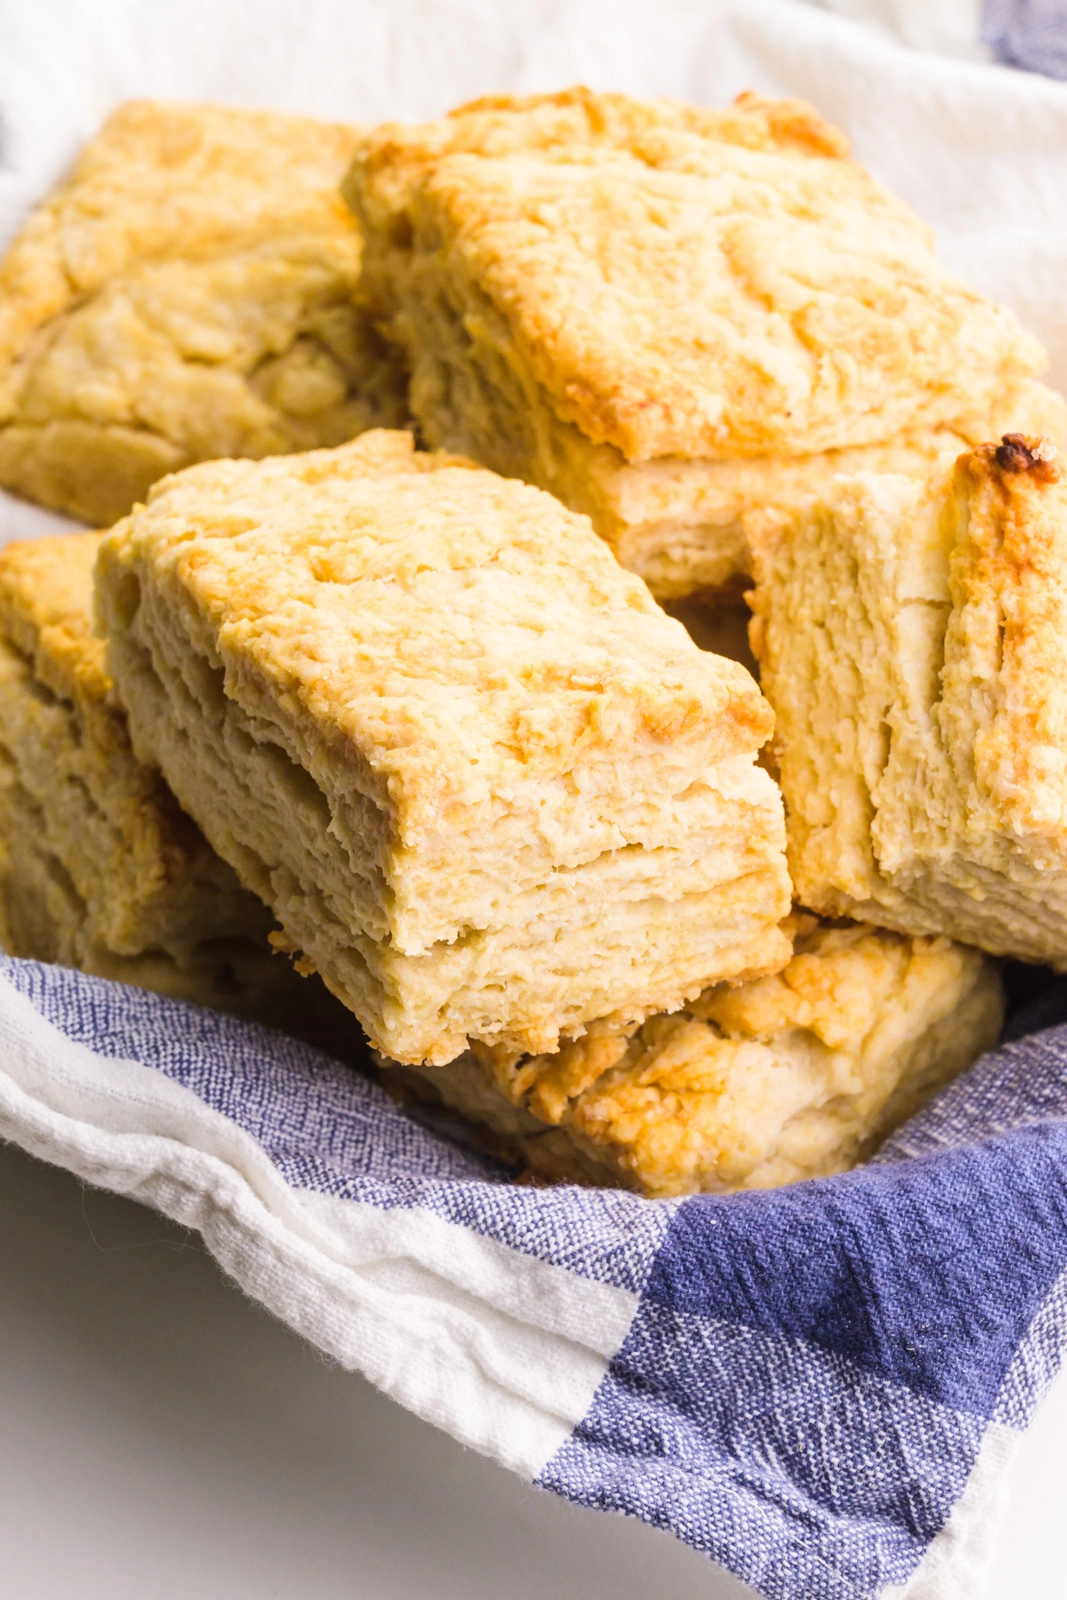 A blue kitchen towel is in a bowl holding several golden brown rectangle biscuits.